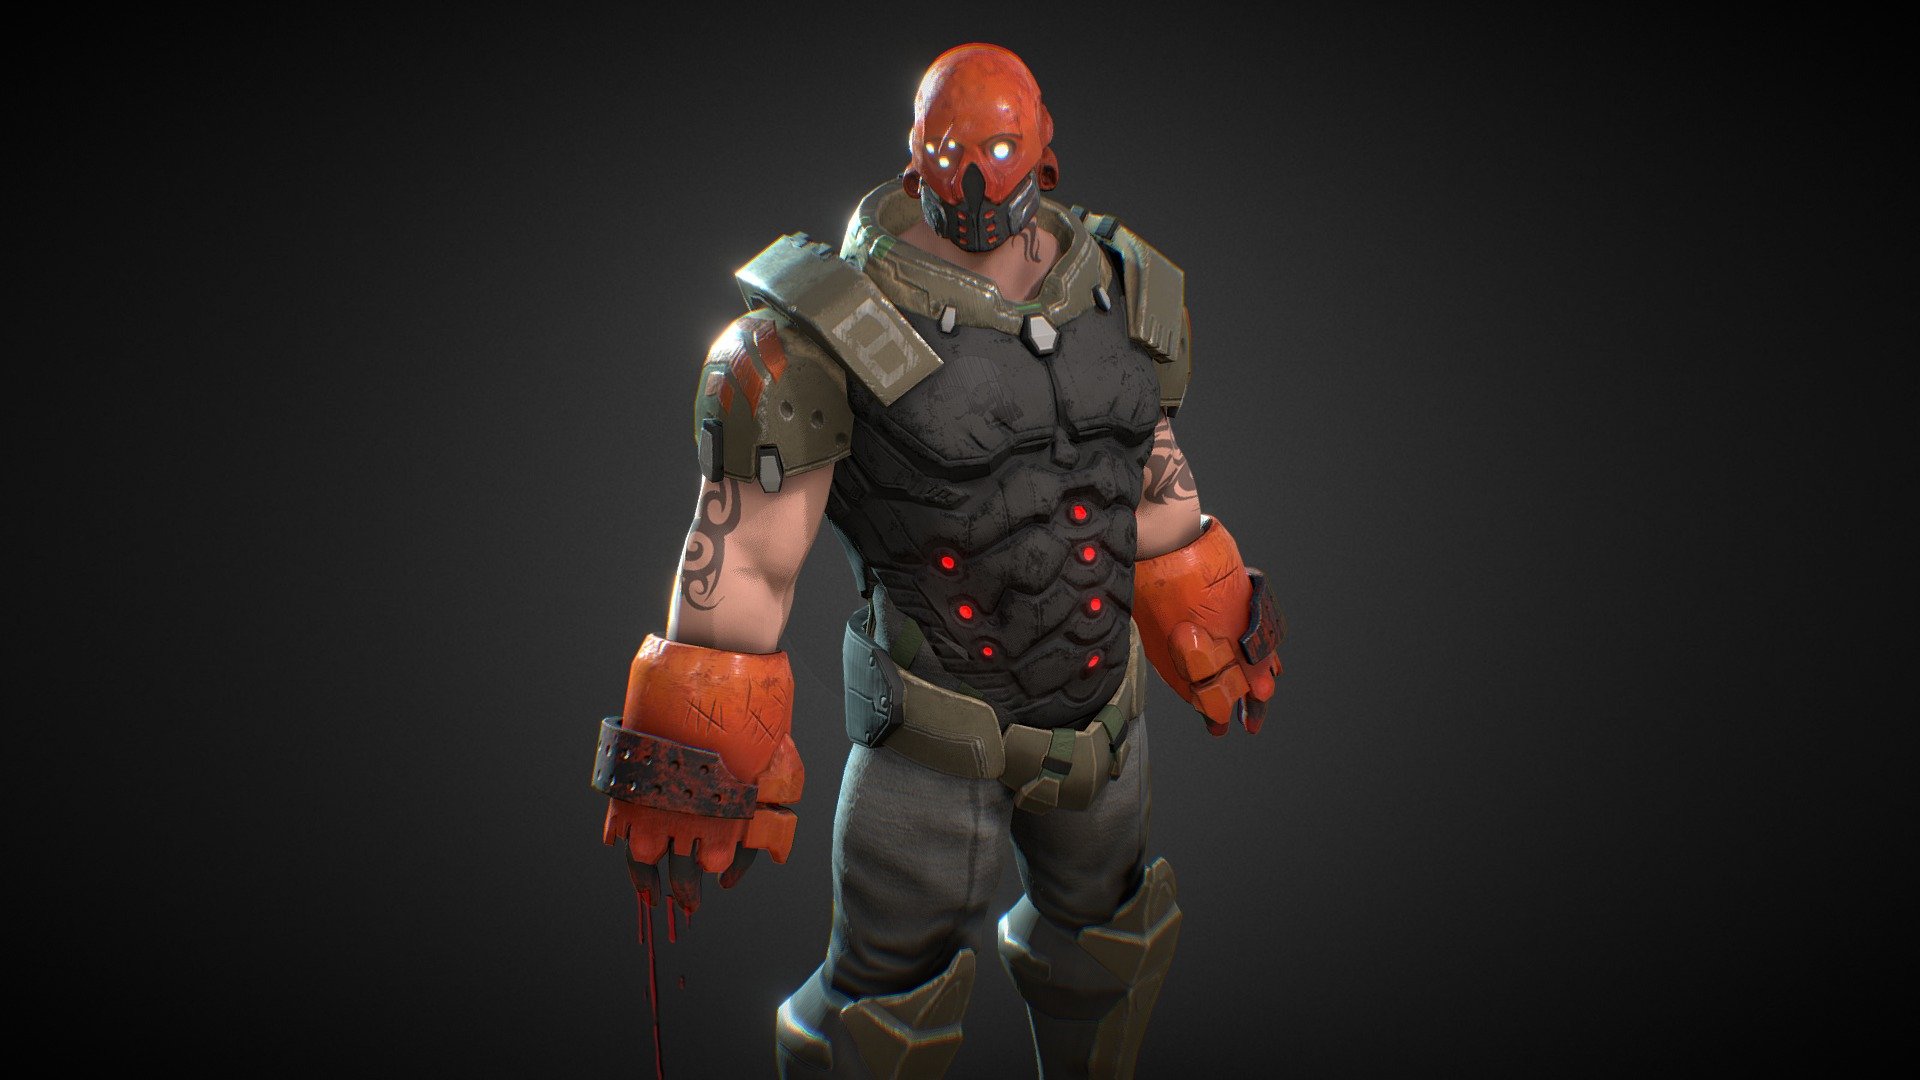 Modeled this dude to practice making characters!  This is my second character I've made, so let me know what you think : )
Made in Maya, ZBrush, and Substance.

Based on this concept art by Adrian Dadich:
http://adriandadich.deviantart.com/art/Beat-Down-299482068
(I adjusted some anatomical features to be more realistic) - BEATDOWN - 3D model by Sebastian Metzgar (@smetzgar) 3d model